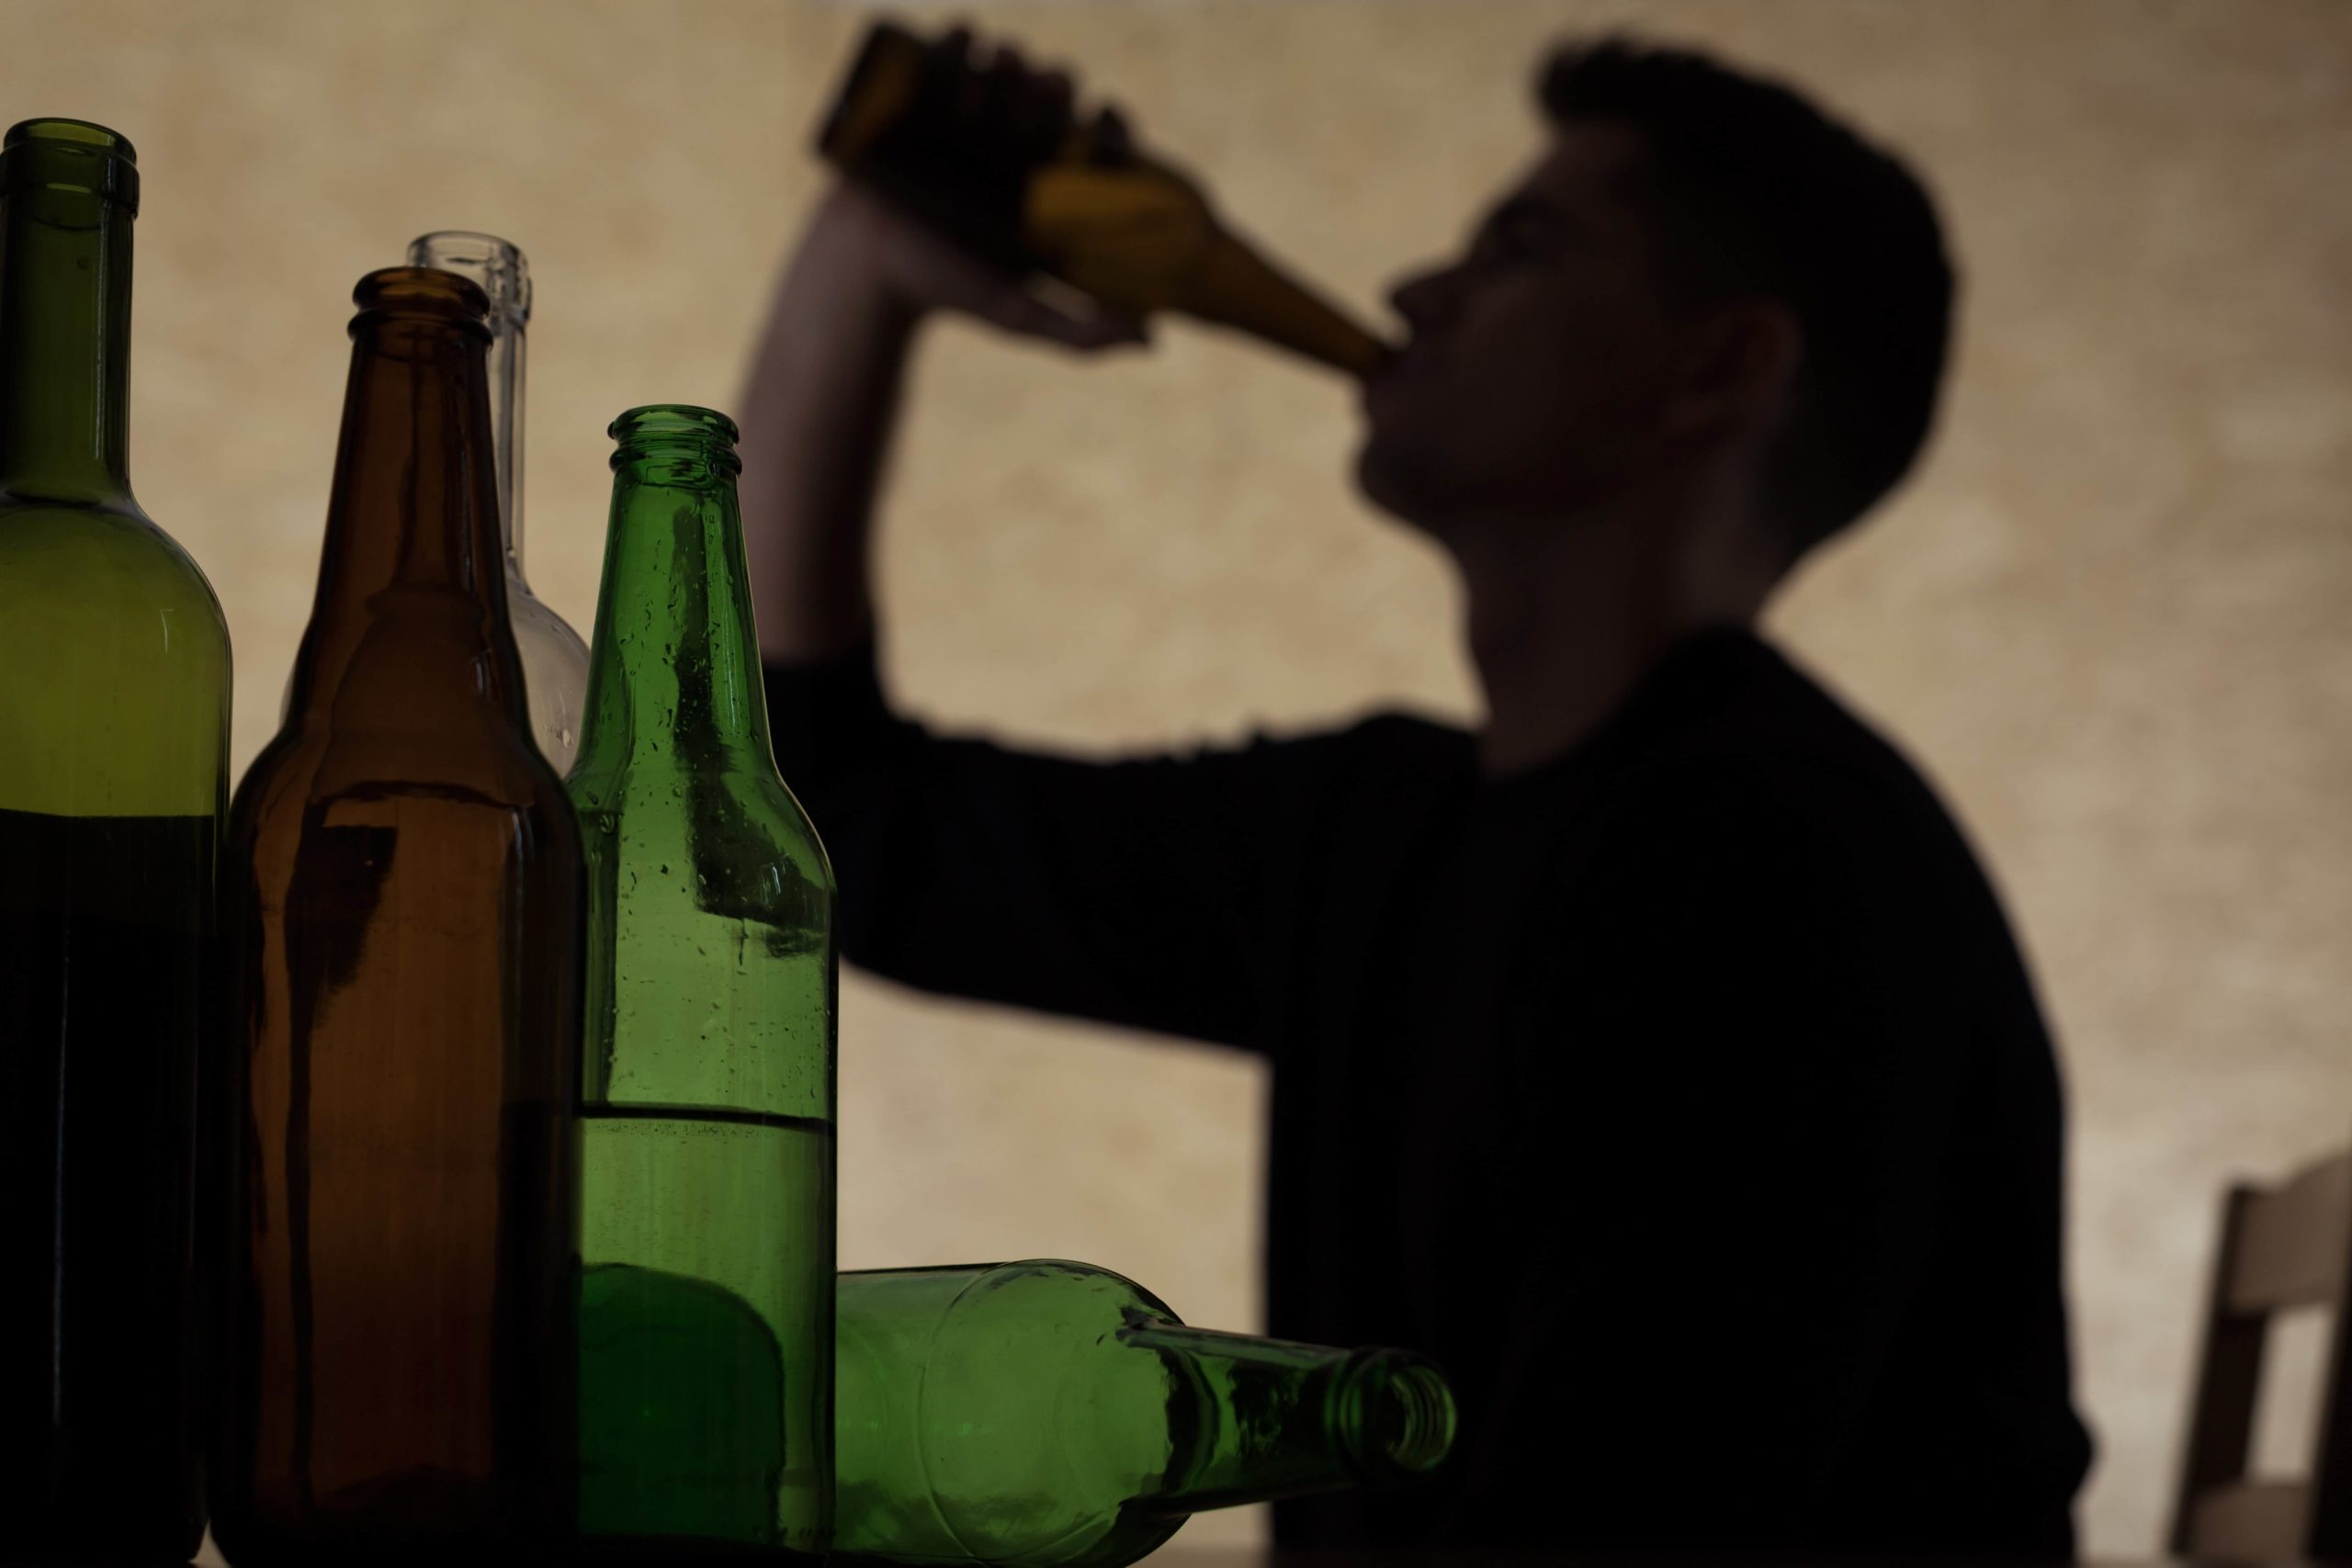 man struggling with alcoholism